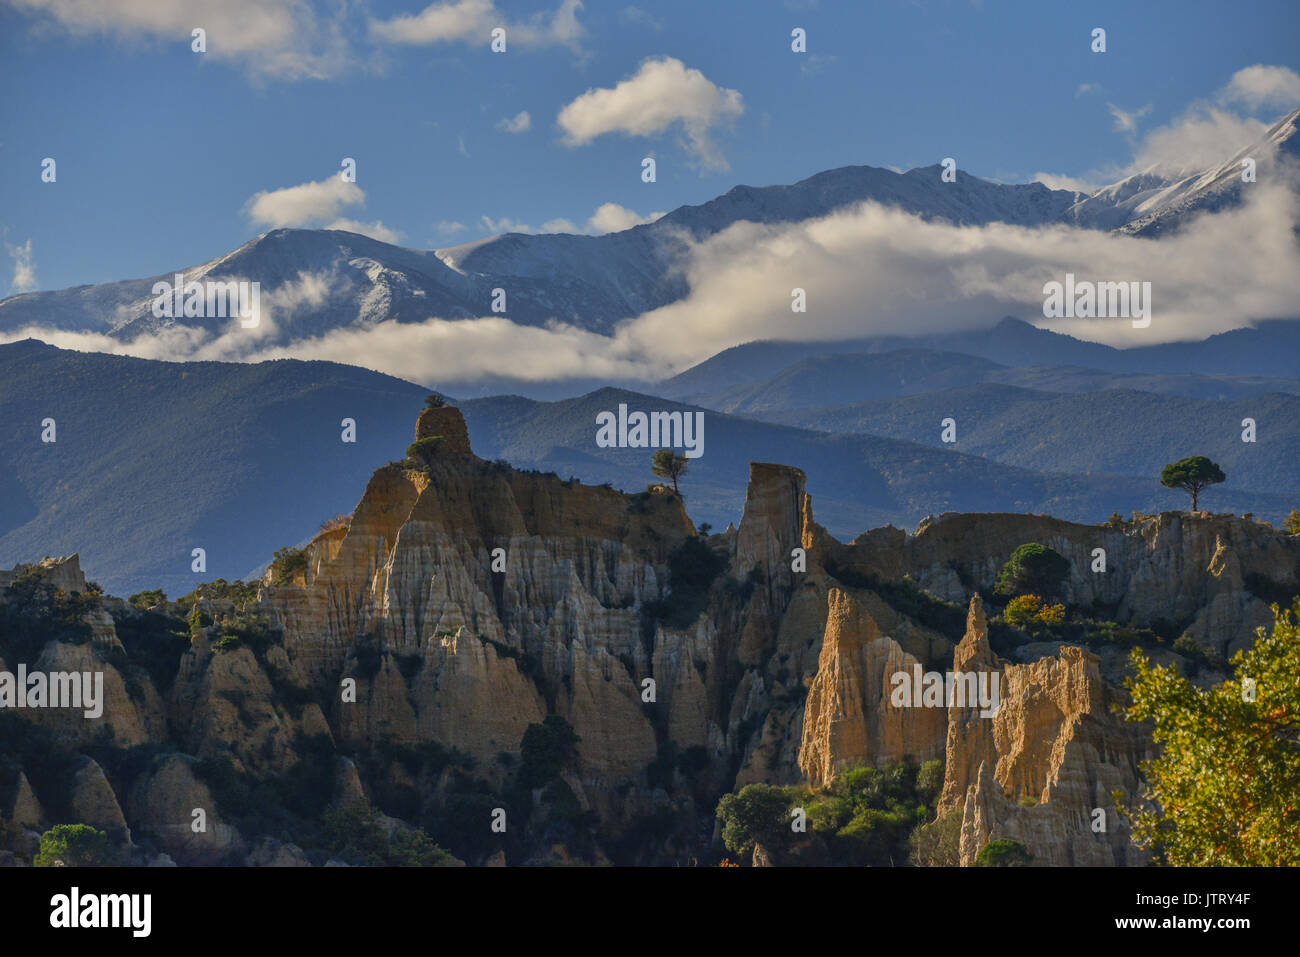 Les Orgues, with Mt Canigou in the background, Pyrenees Orientales, France. Stock Photo